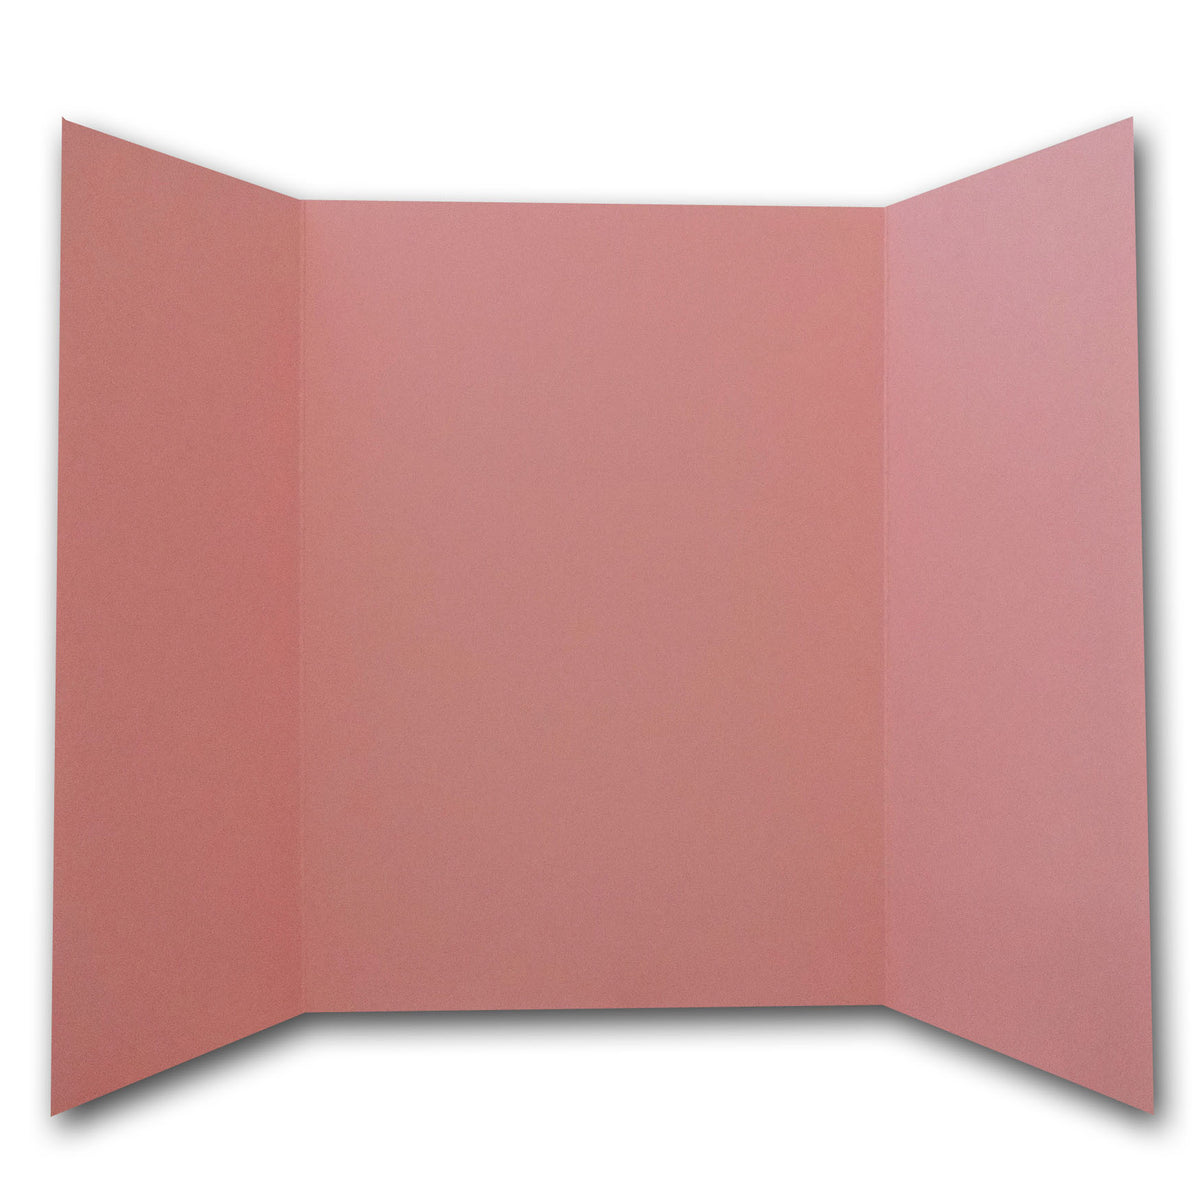 Pink 5x7 Gate Fold Discount Card Stock for DIY Invitations